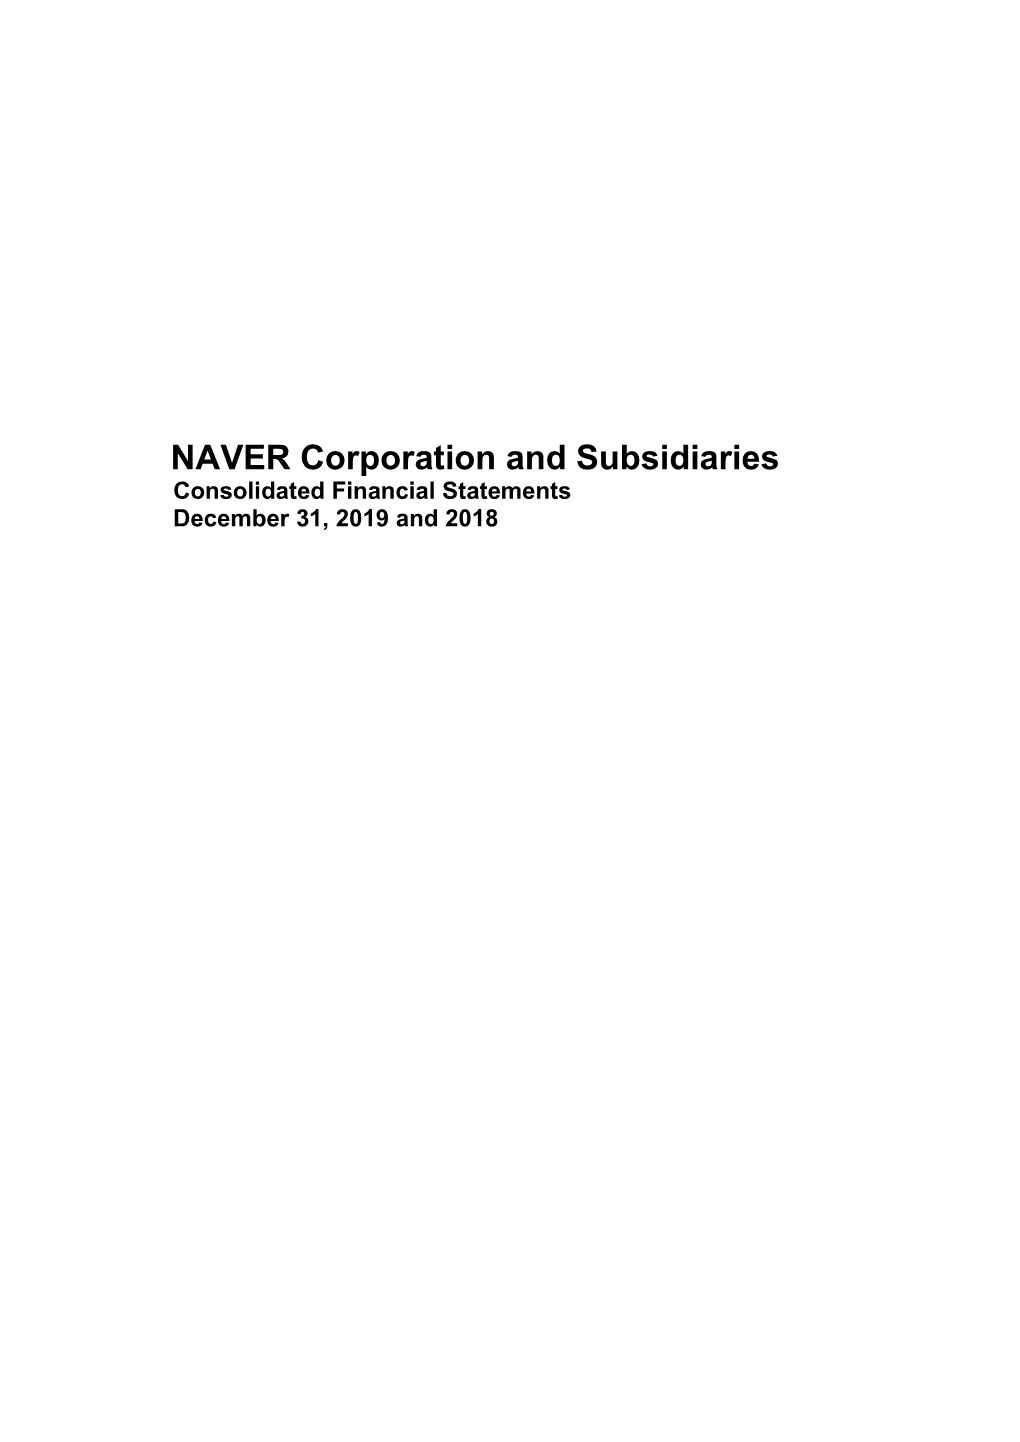 NAVER Corporation and Subsidiaries Consolidated Financial Statements December 31, 2019 and 2018